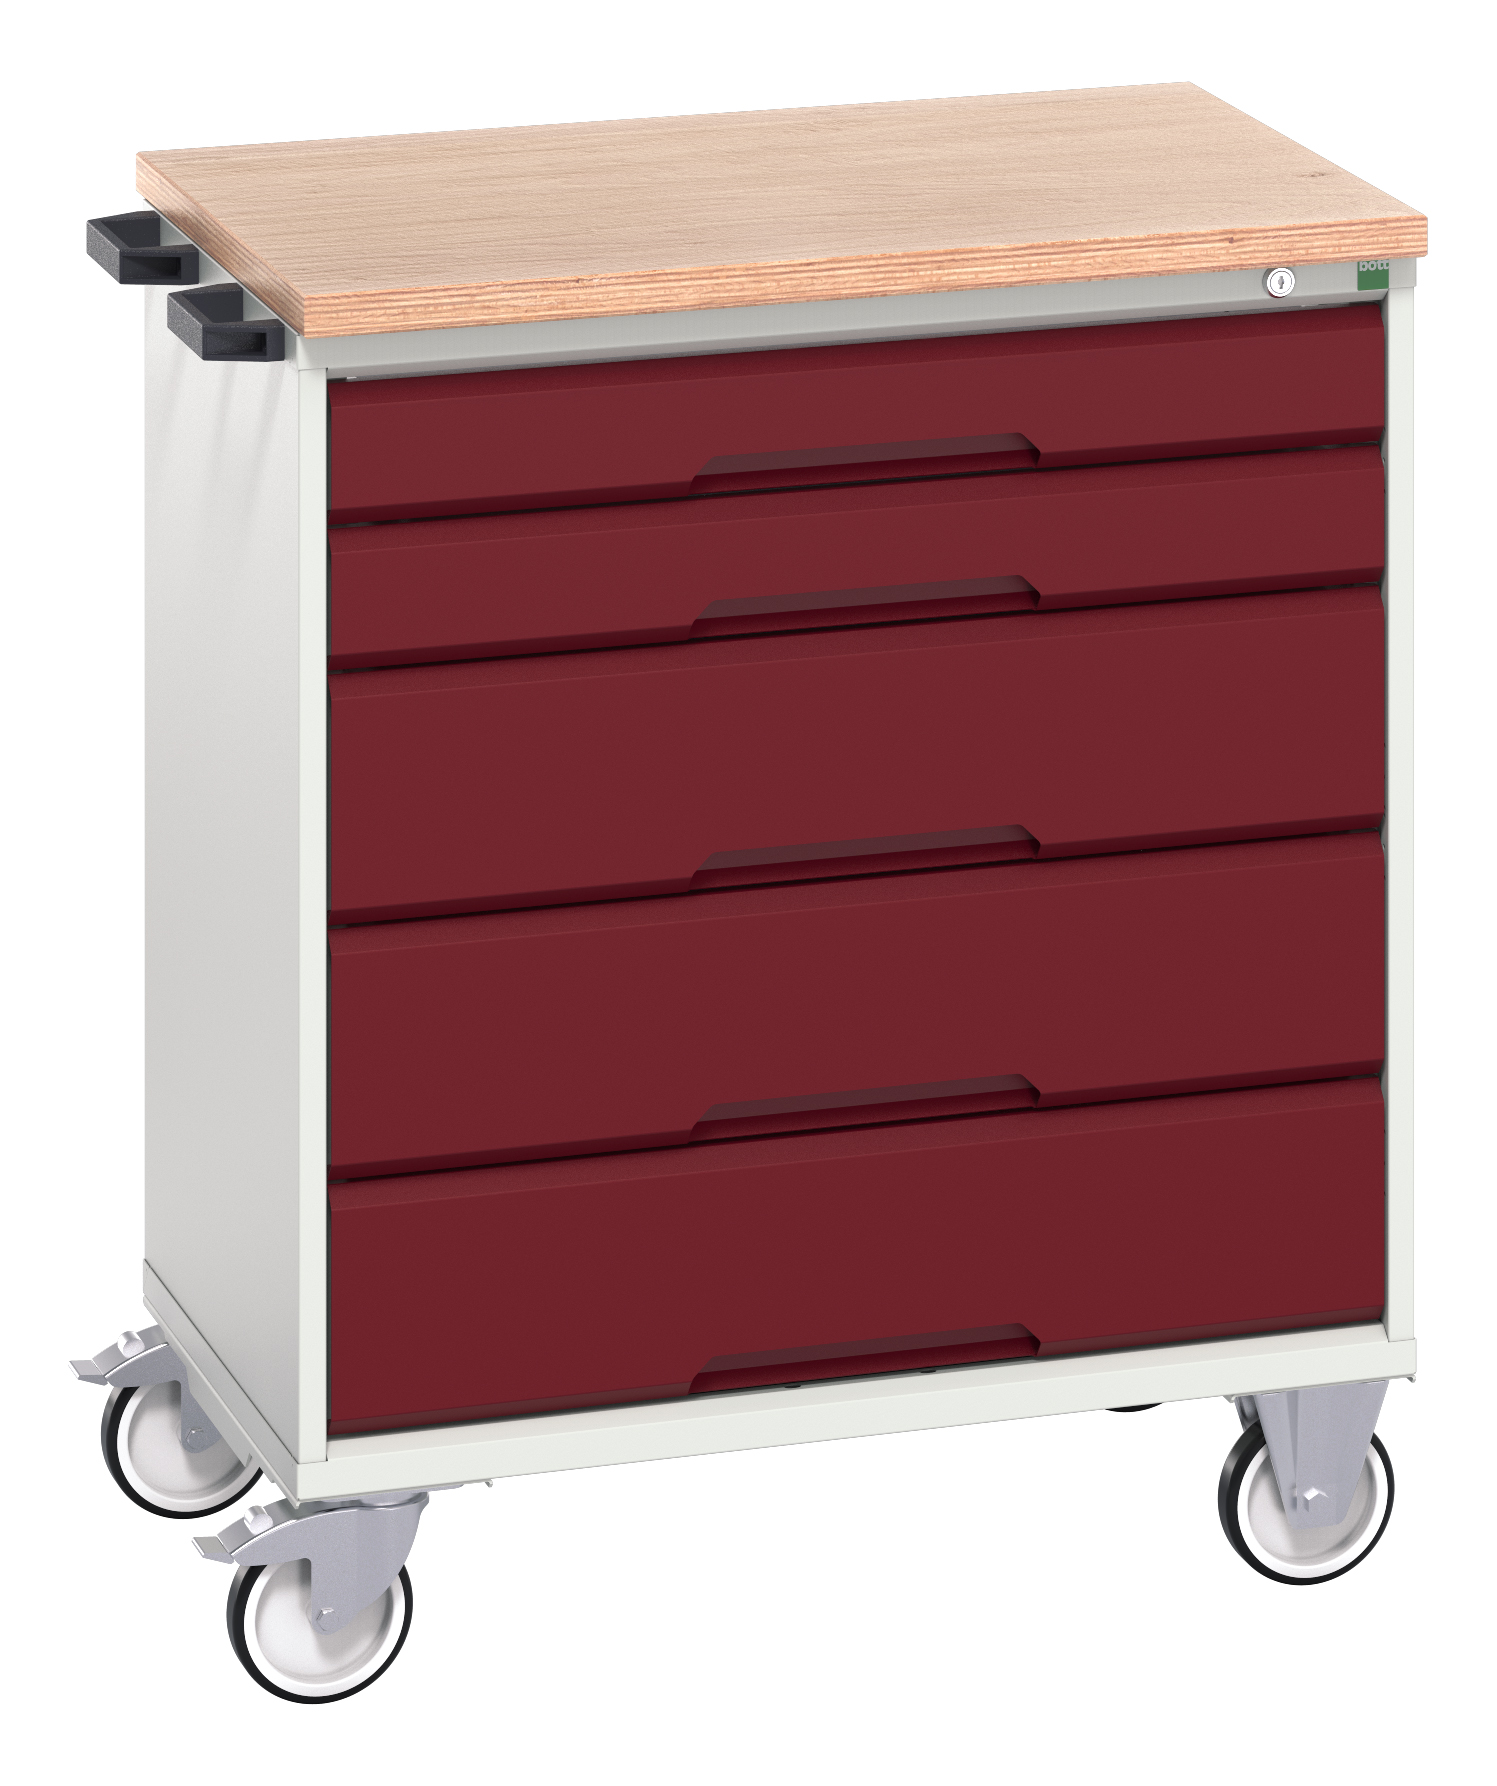 Bott Verso Mobile Drawer Cabinet With 5 Drawers & Multiplex Top - 16927001.24